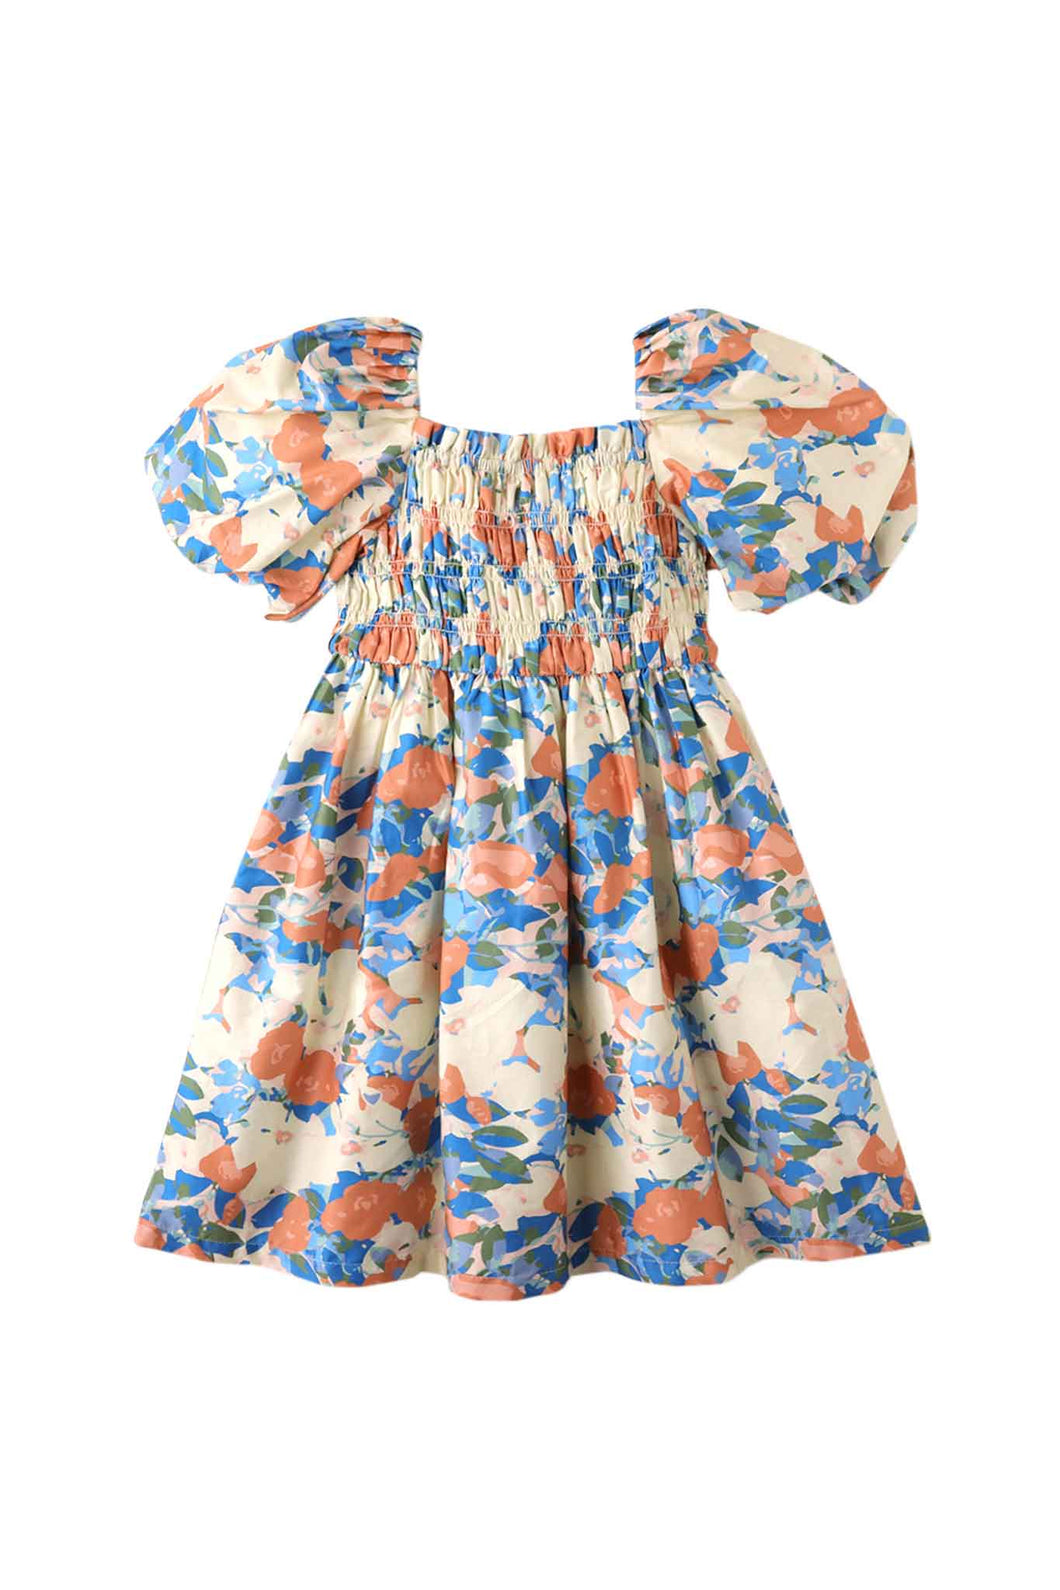 Gingersnaps Toile Print Dress with Smocked Bodice & Bubble Sleeves